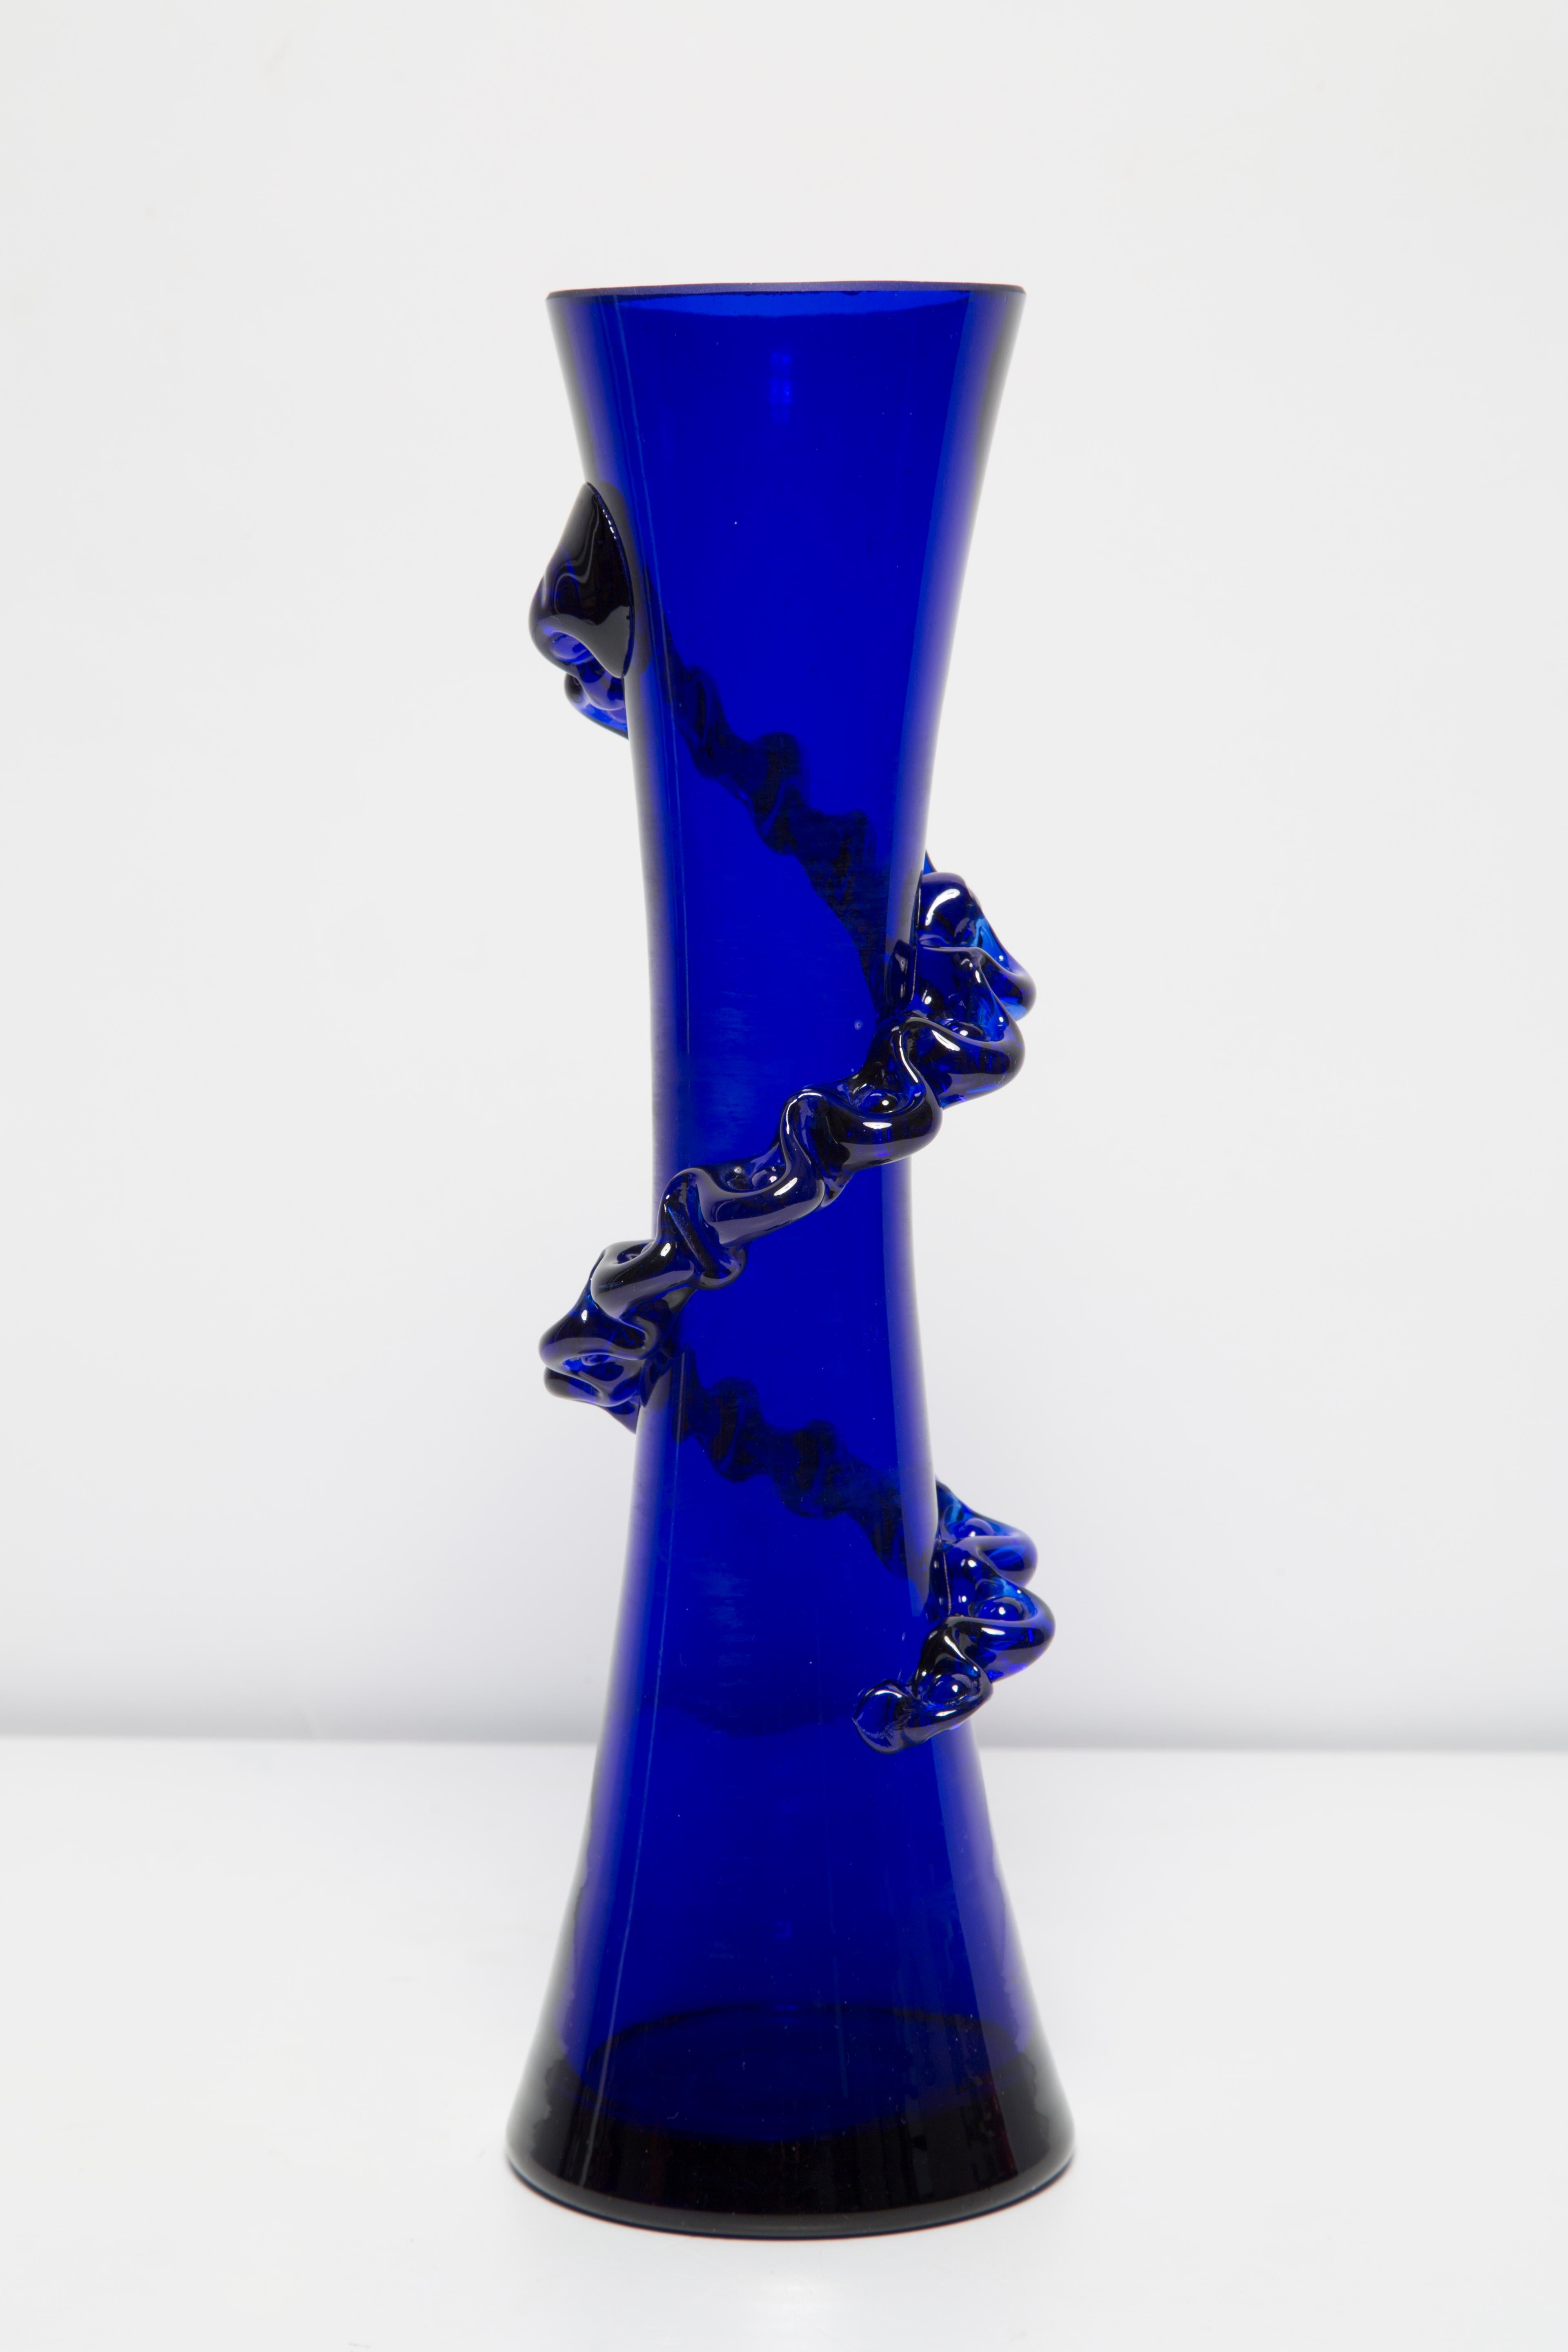 Medium Mid Century Blue Vase with Frill, Europe, 1960s For Sale 1